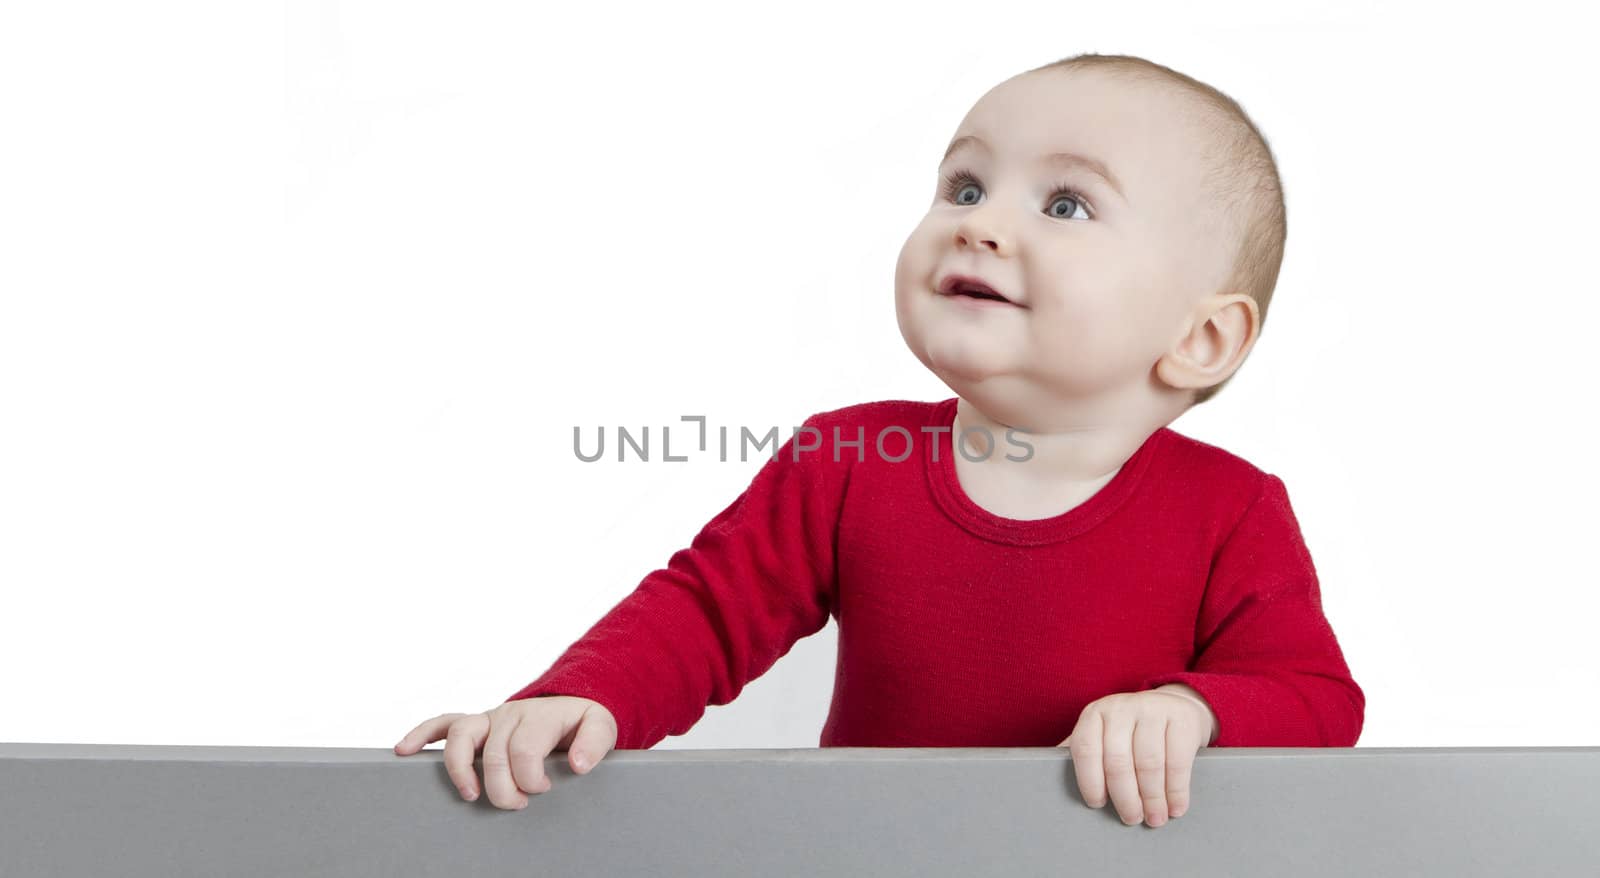 young baby standing at grey cardboard. isolate on white background